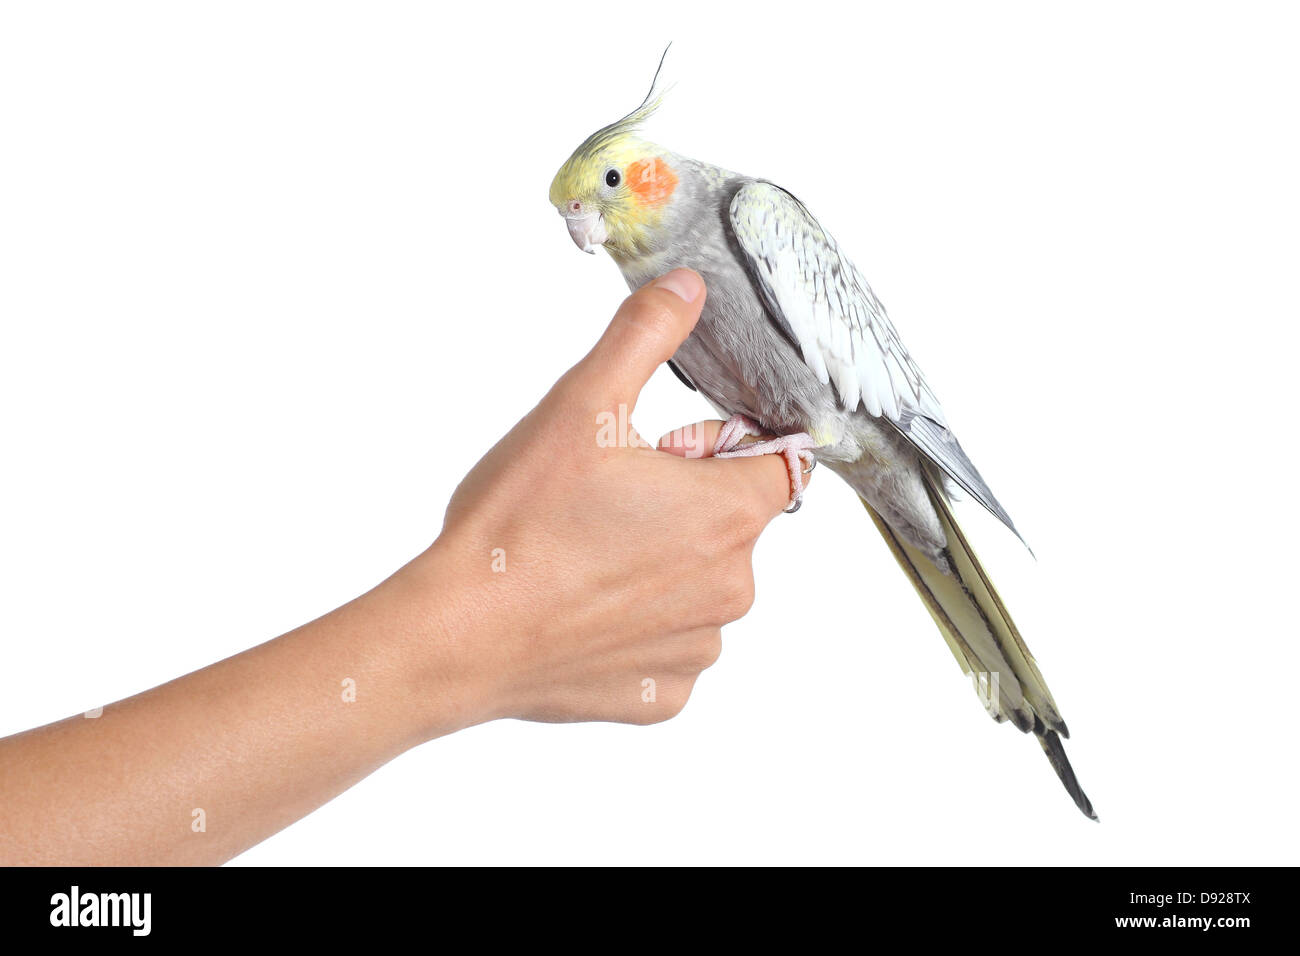 Woman hand holding and caressing with thumb a cockatiel bird isolated on a white background Stock Photo